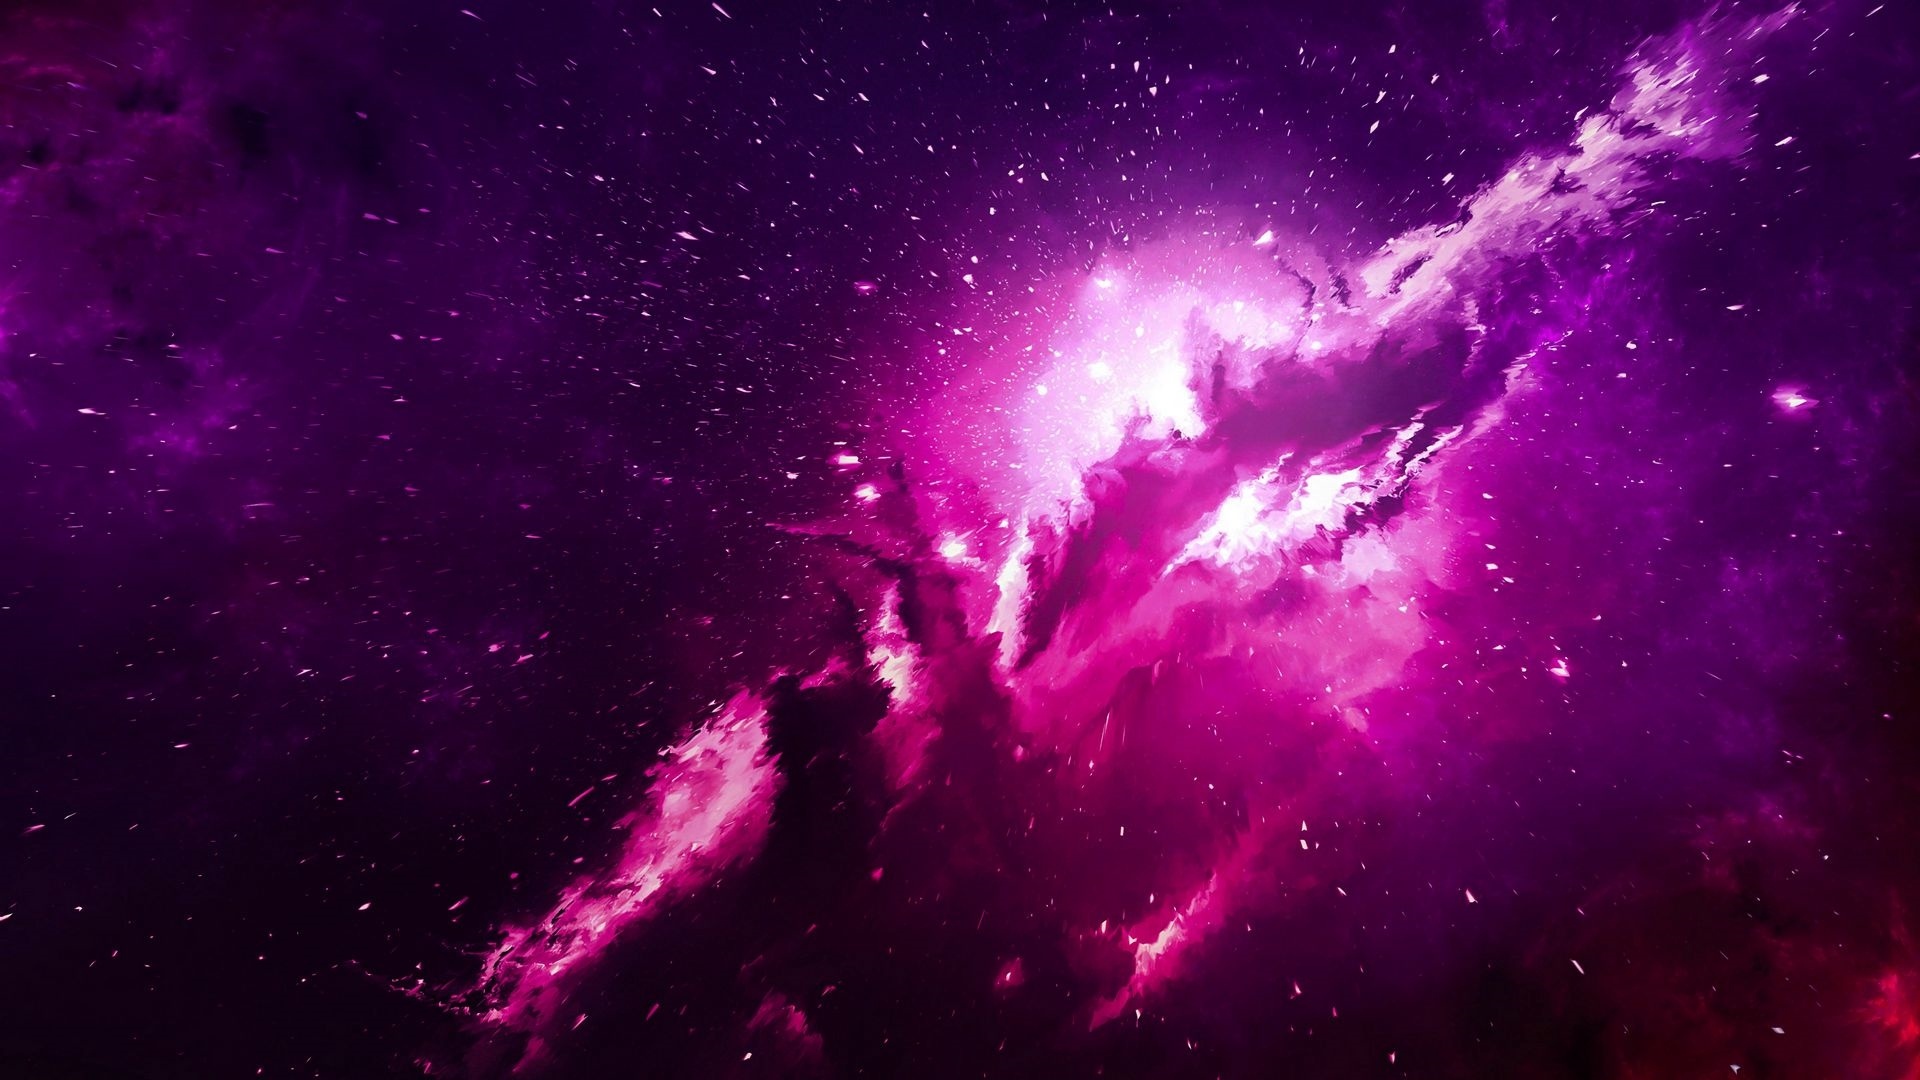 Purple Space wallpaper for pc